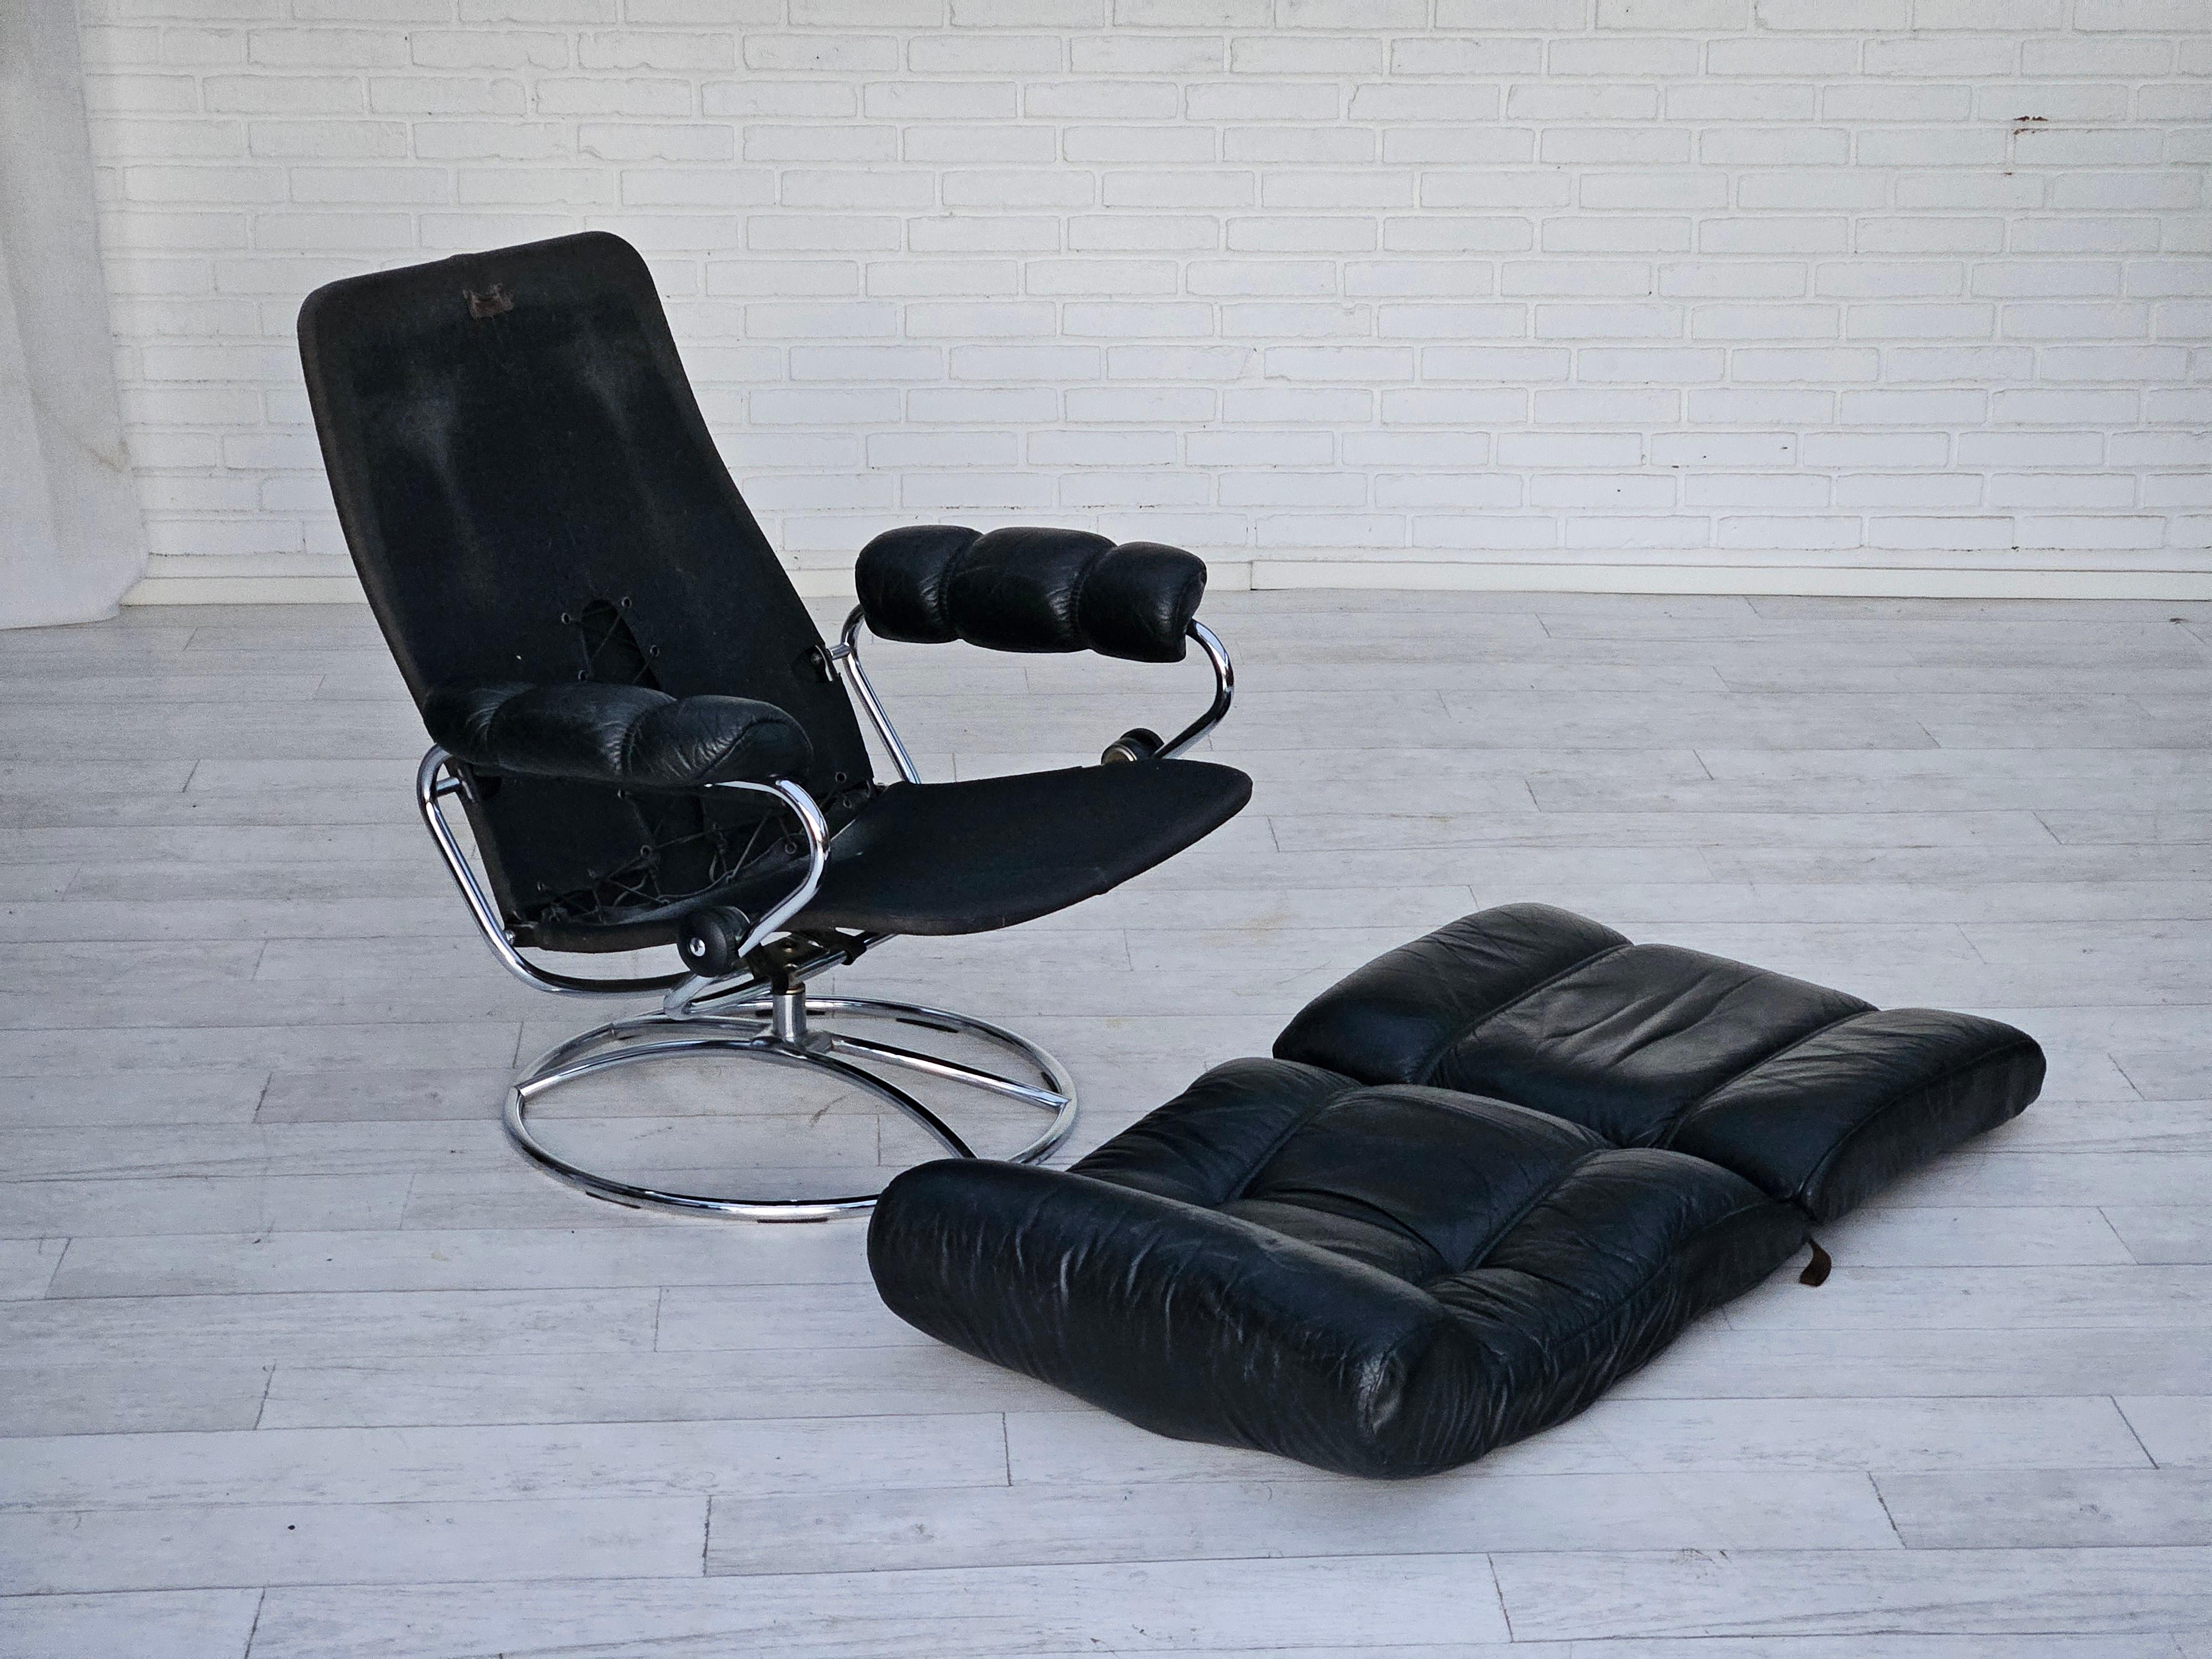 1970s, Norwegian relax swivel chair by Stressless, original very good condition. 9